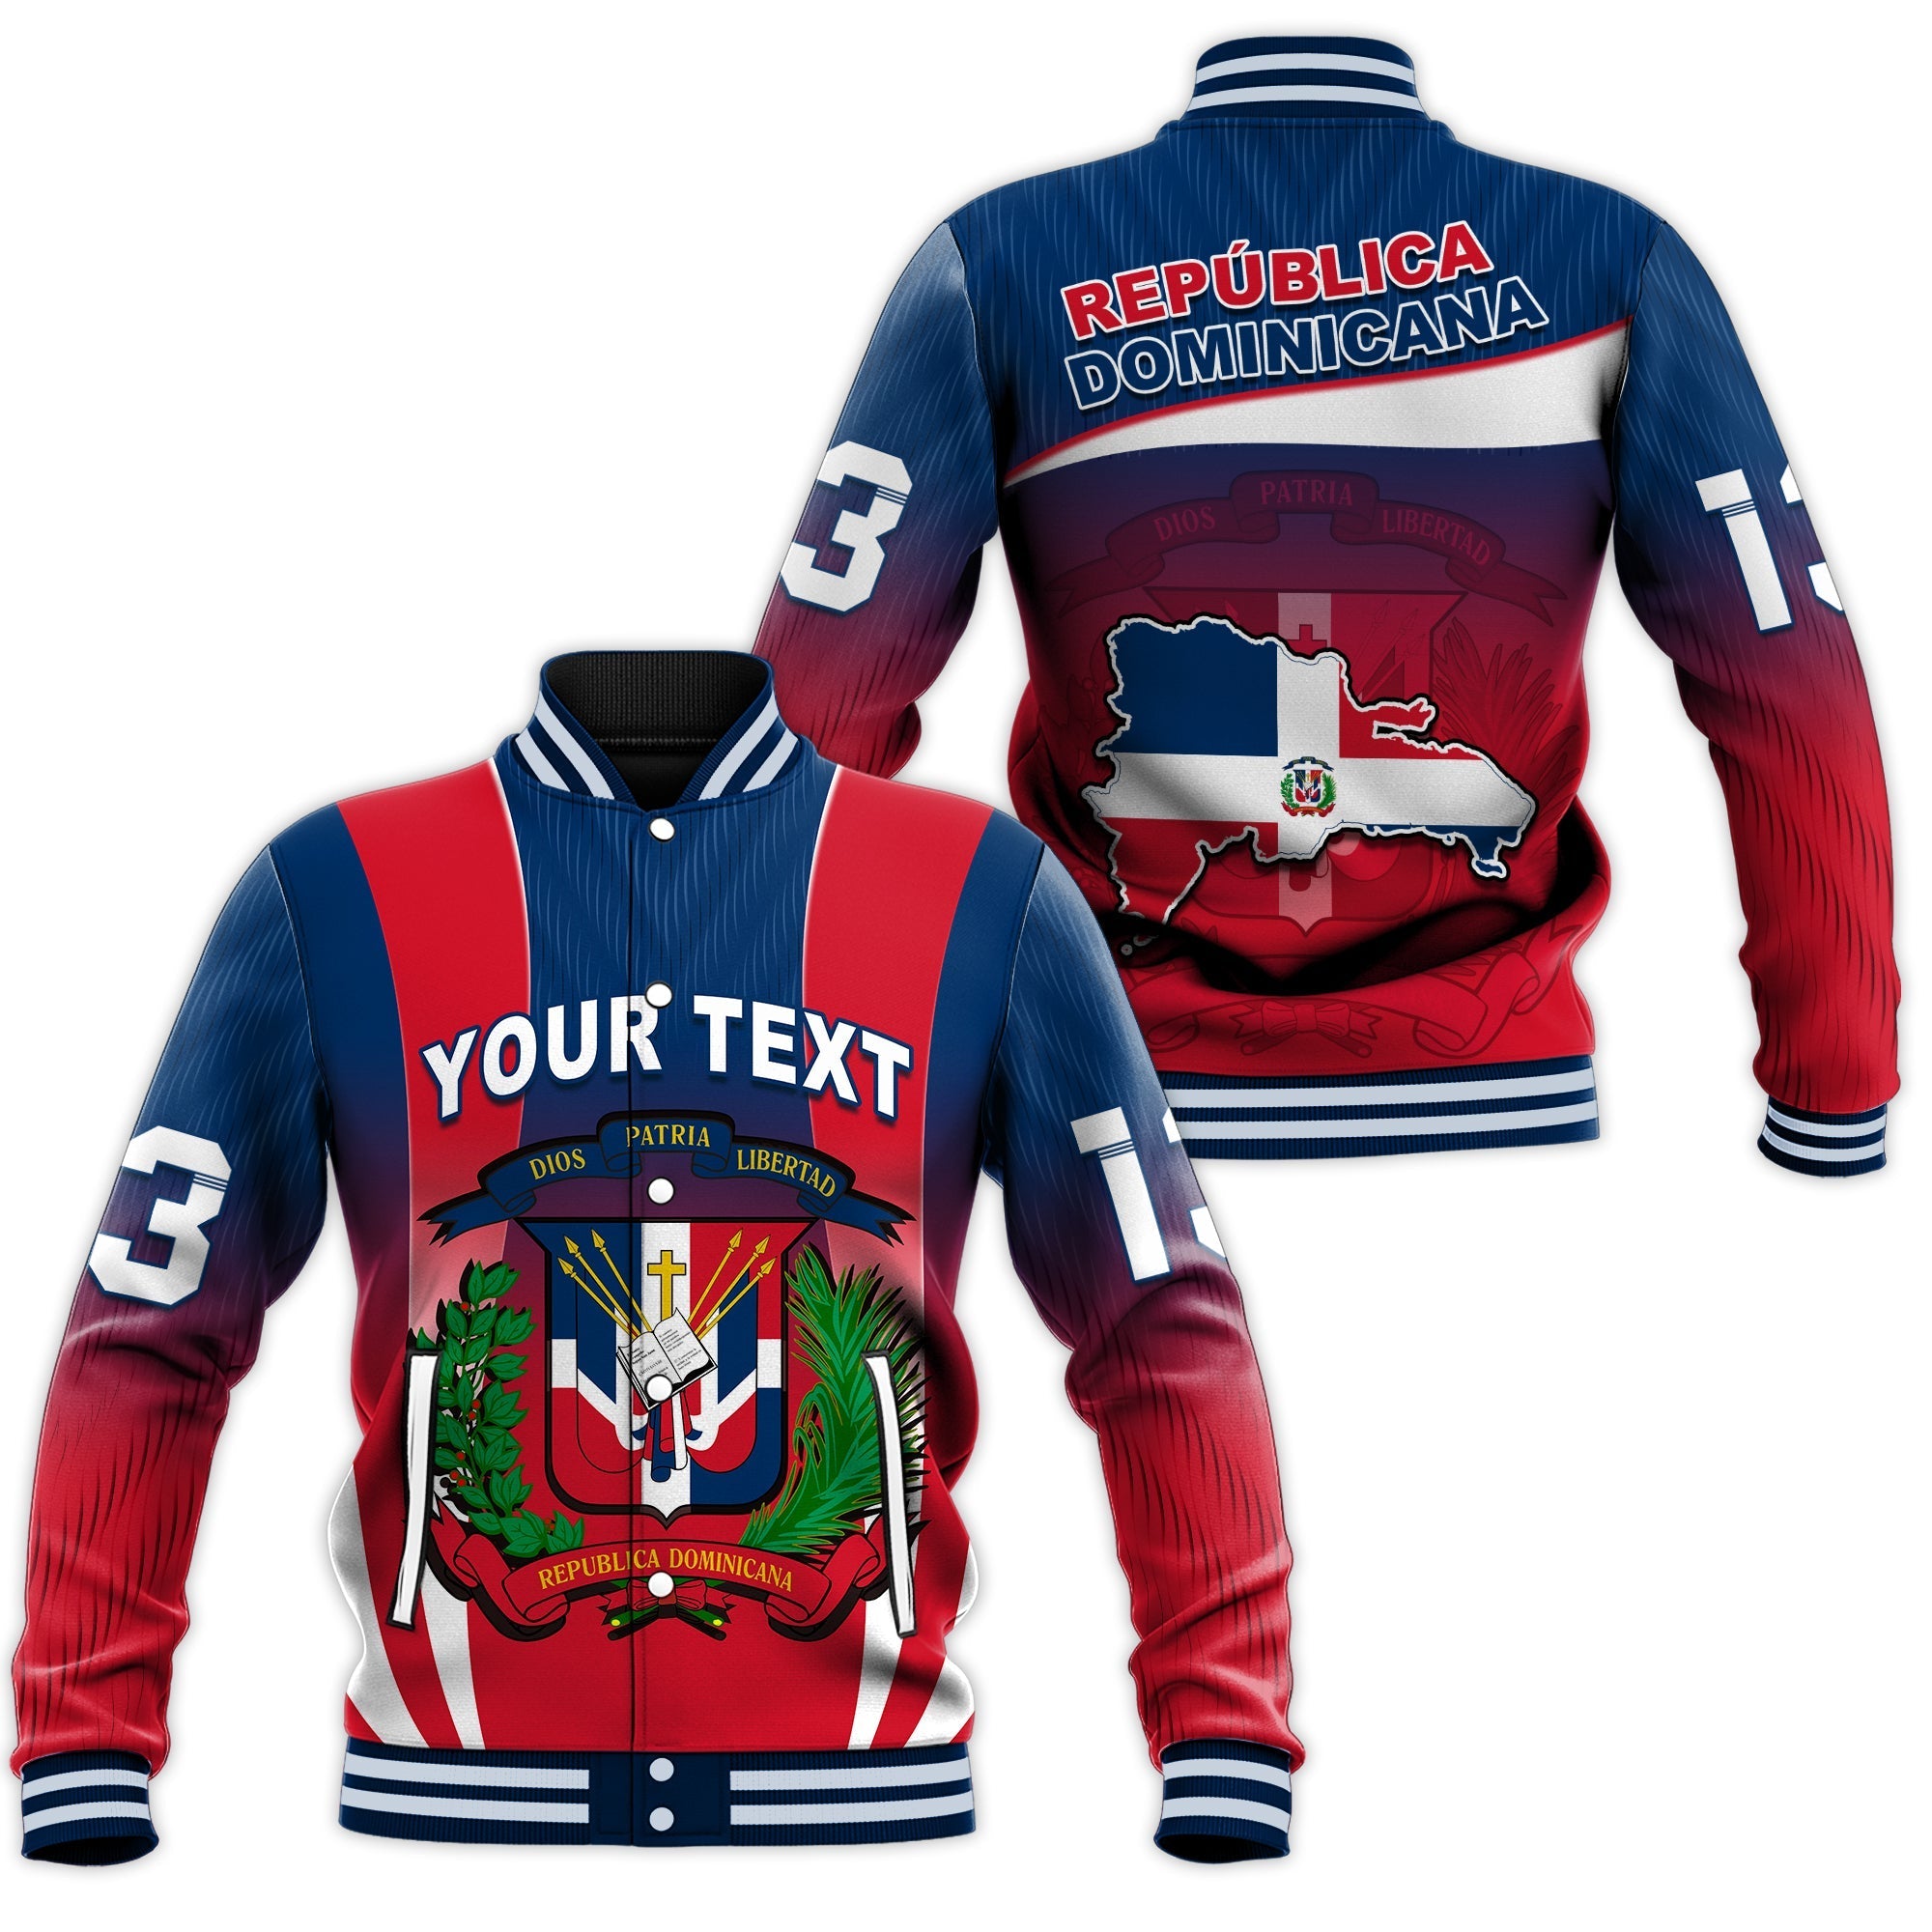 custom-text-and-number-dominican-republic-baseball-jacket-dominicana-style-sporty